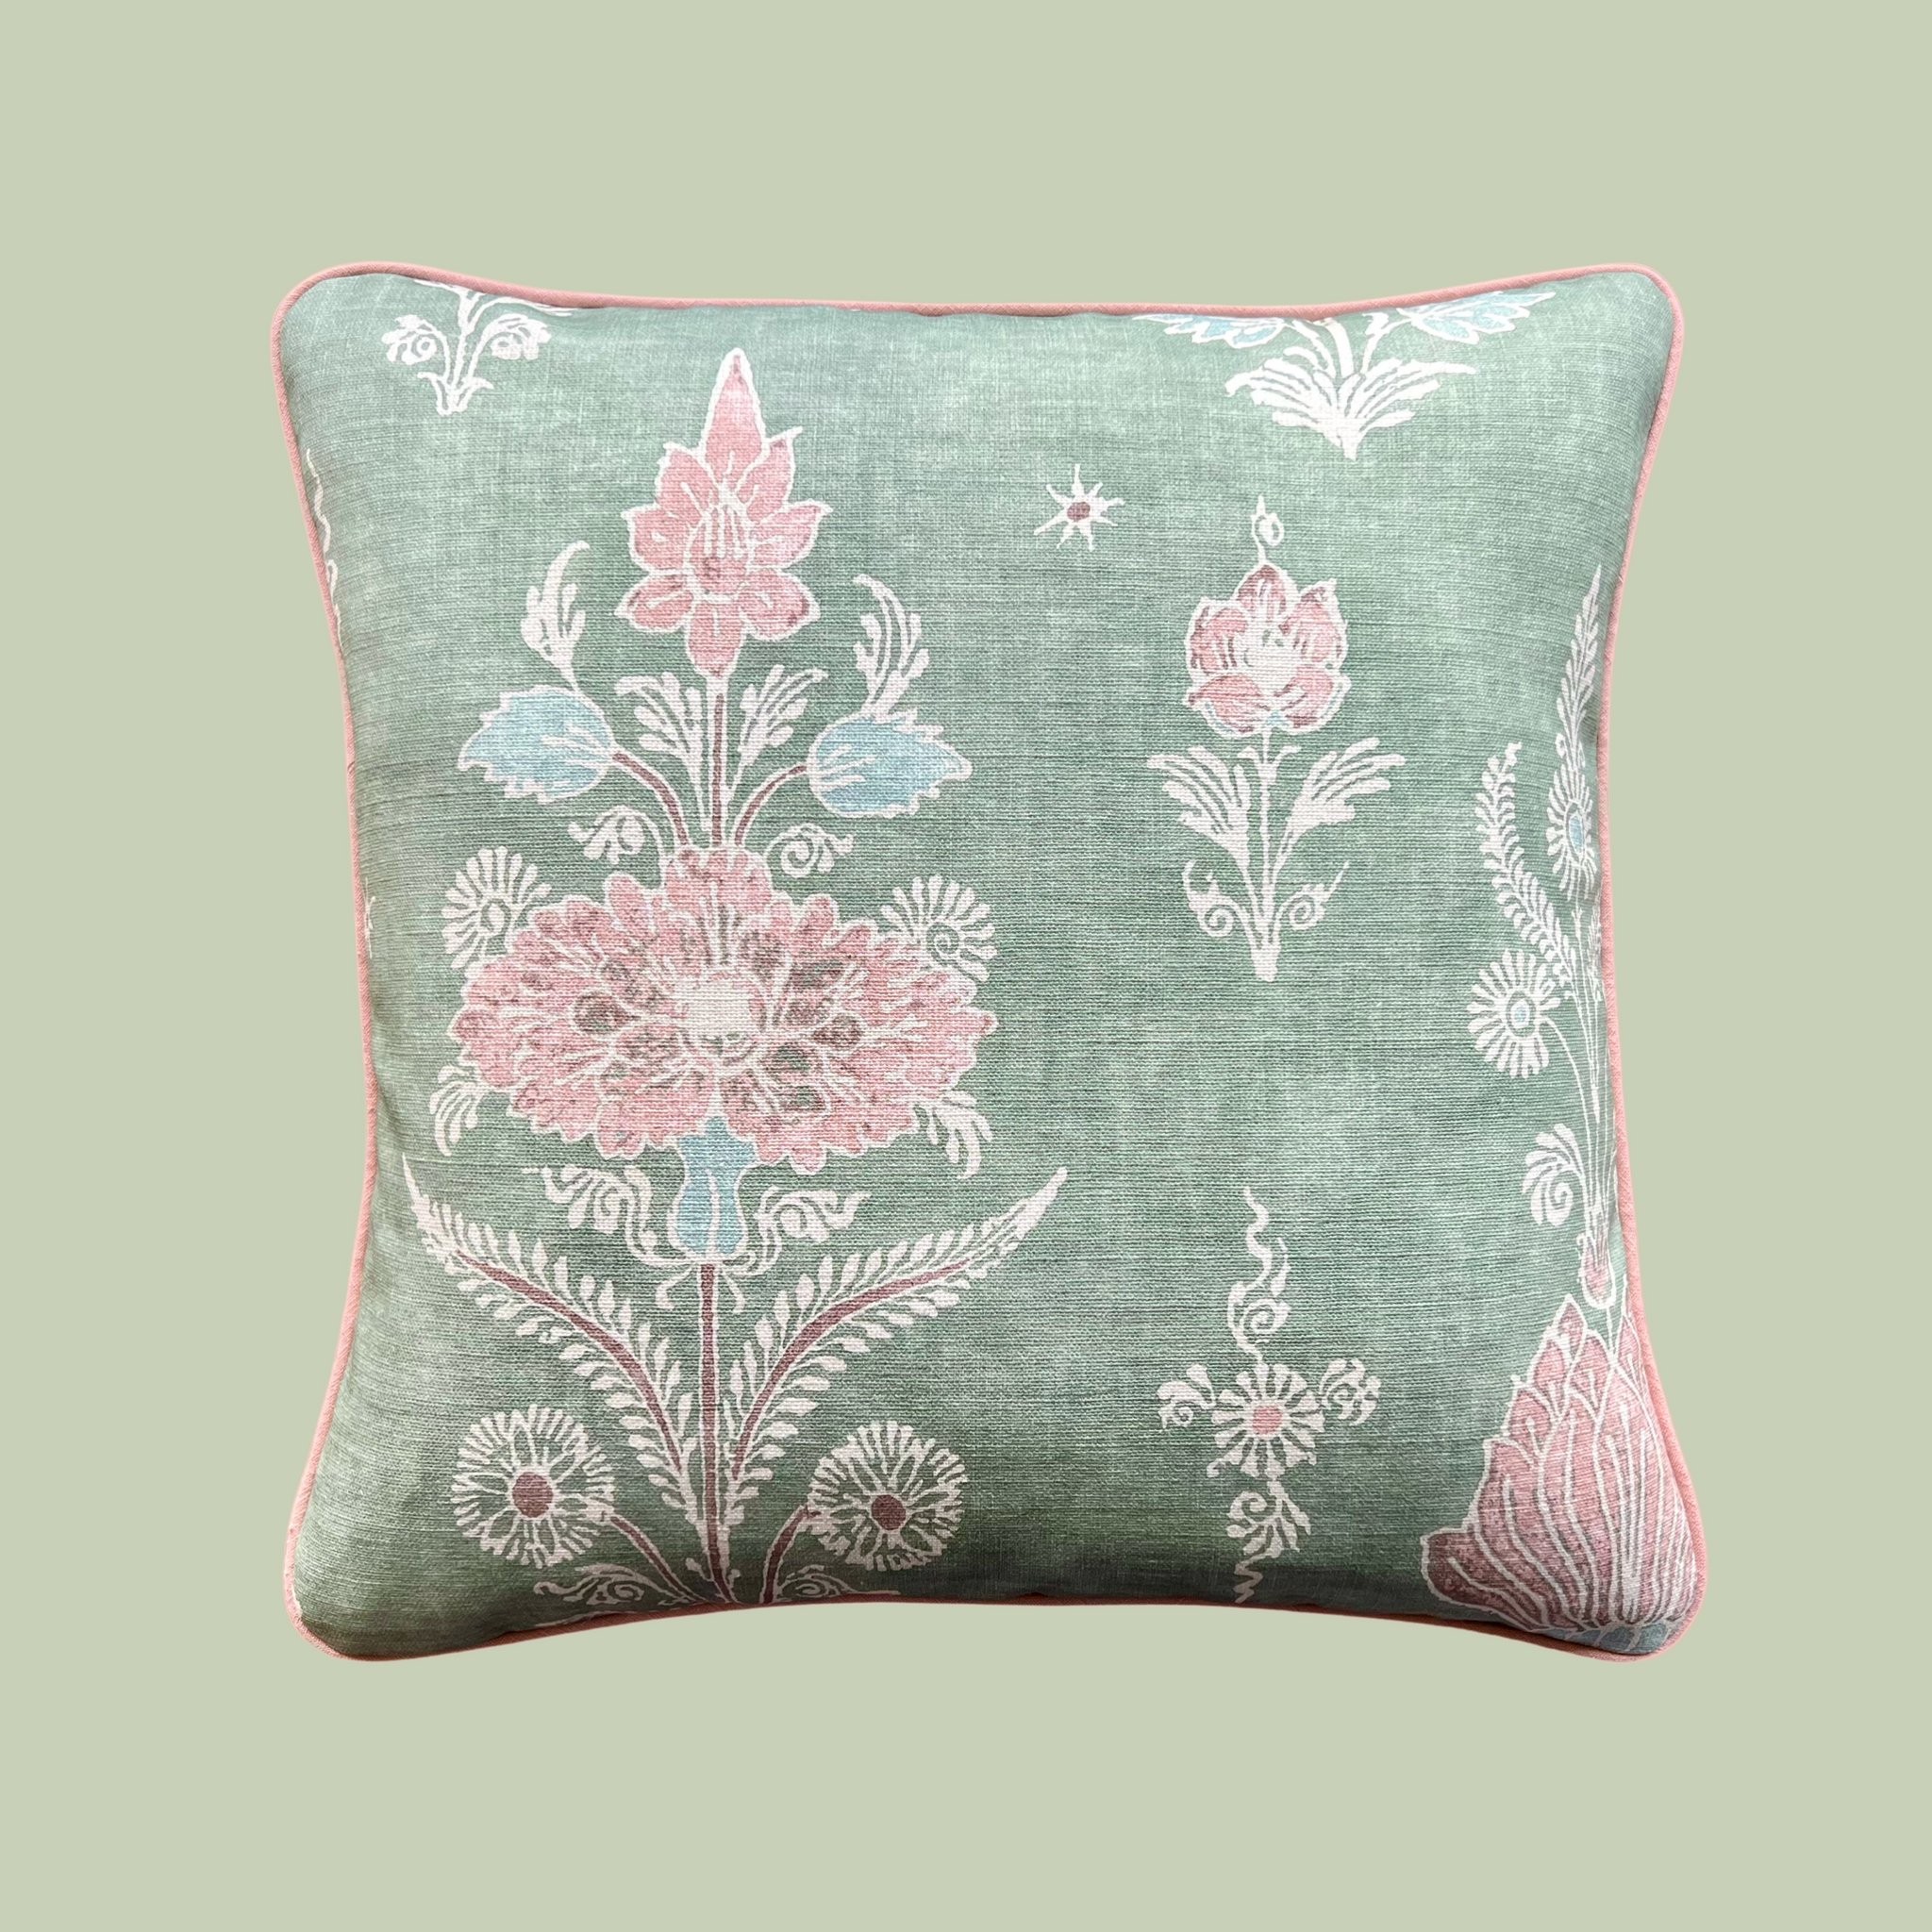 Citadel Floral Print in Green with Light Pink Piping